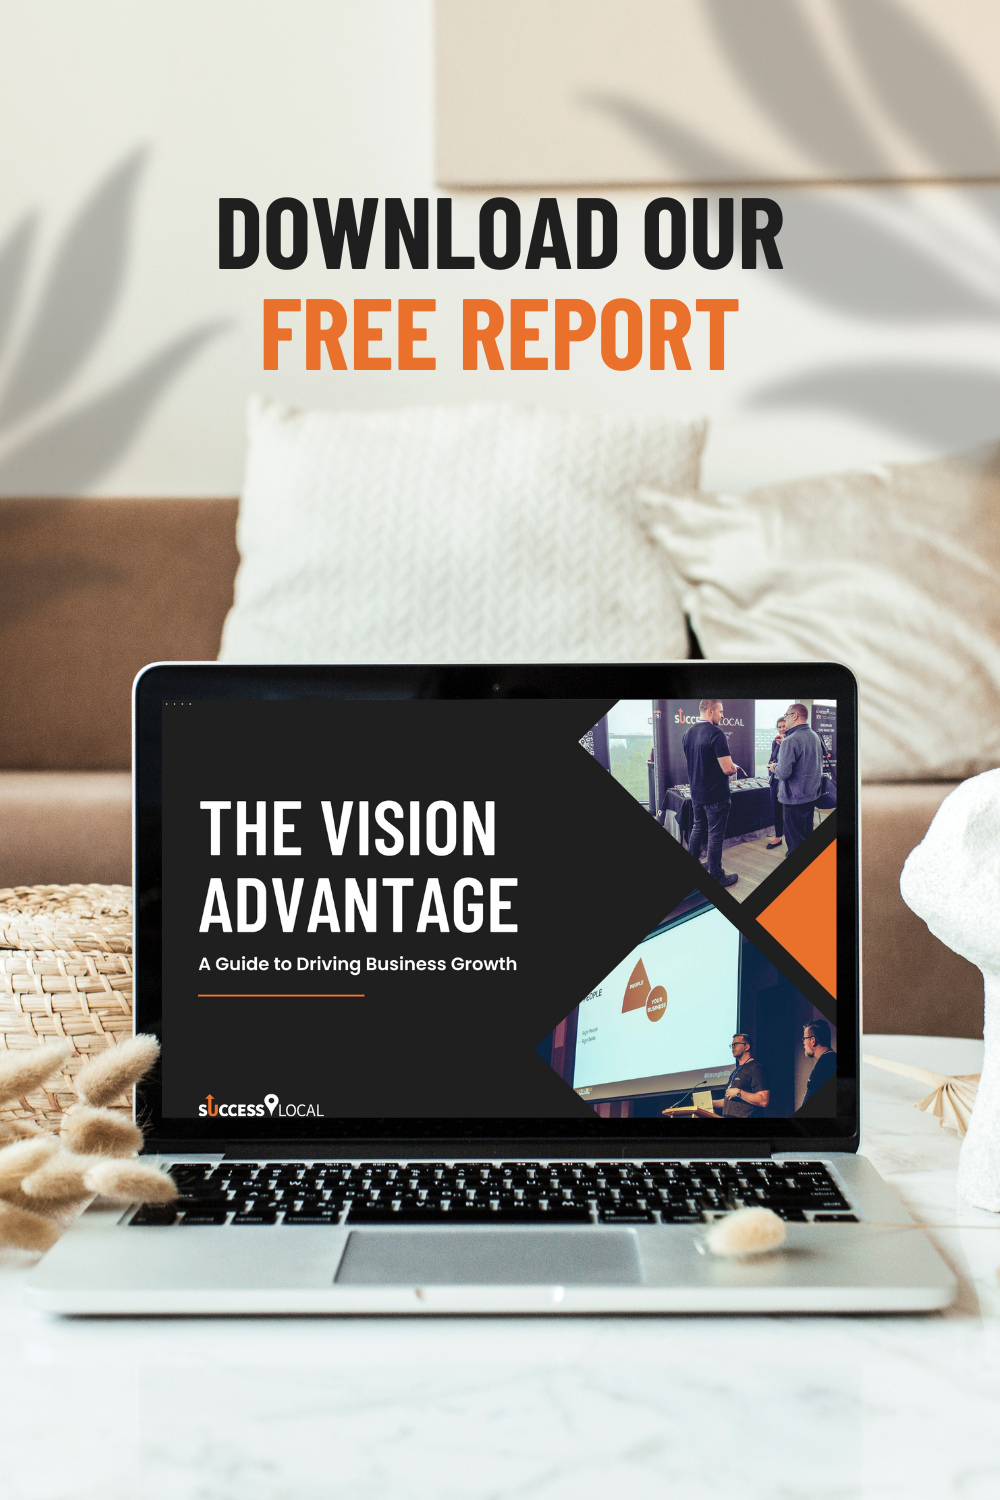 Download our free report